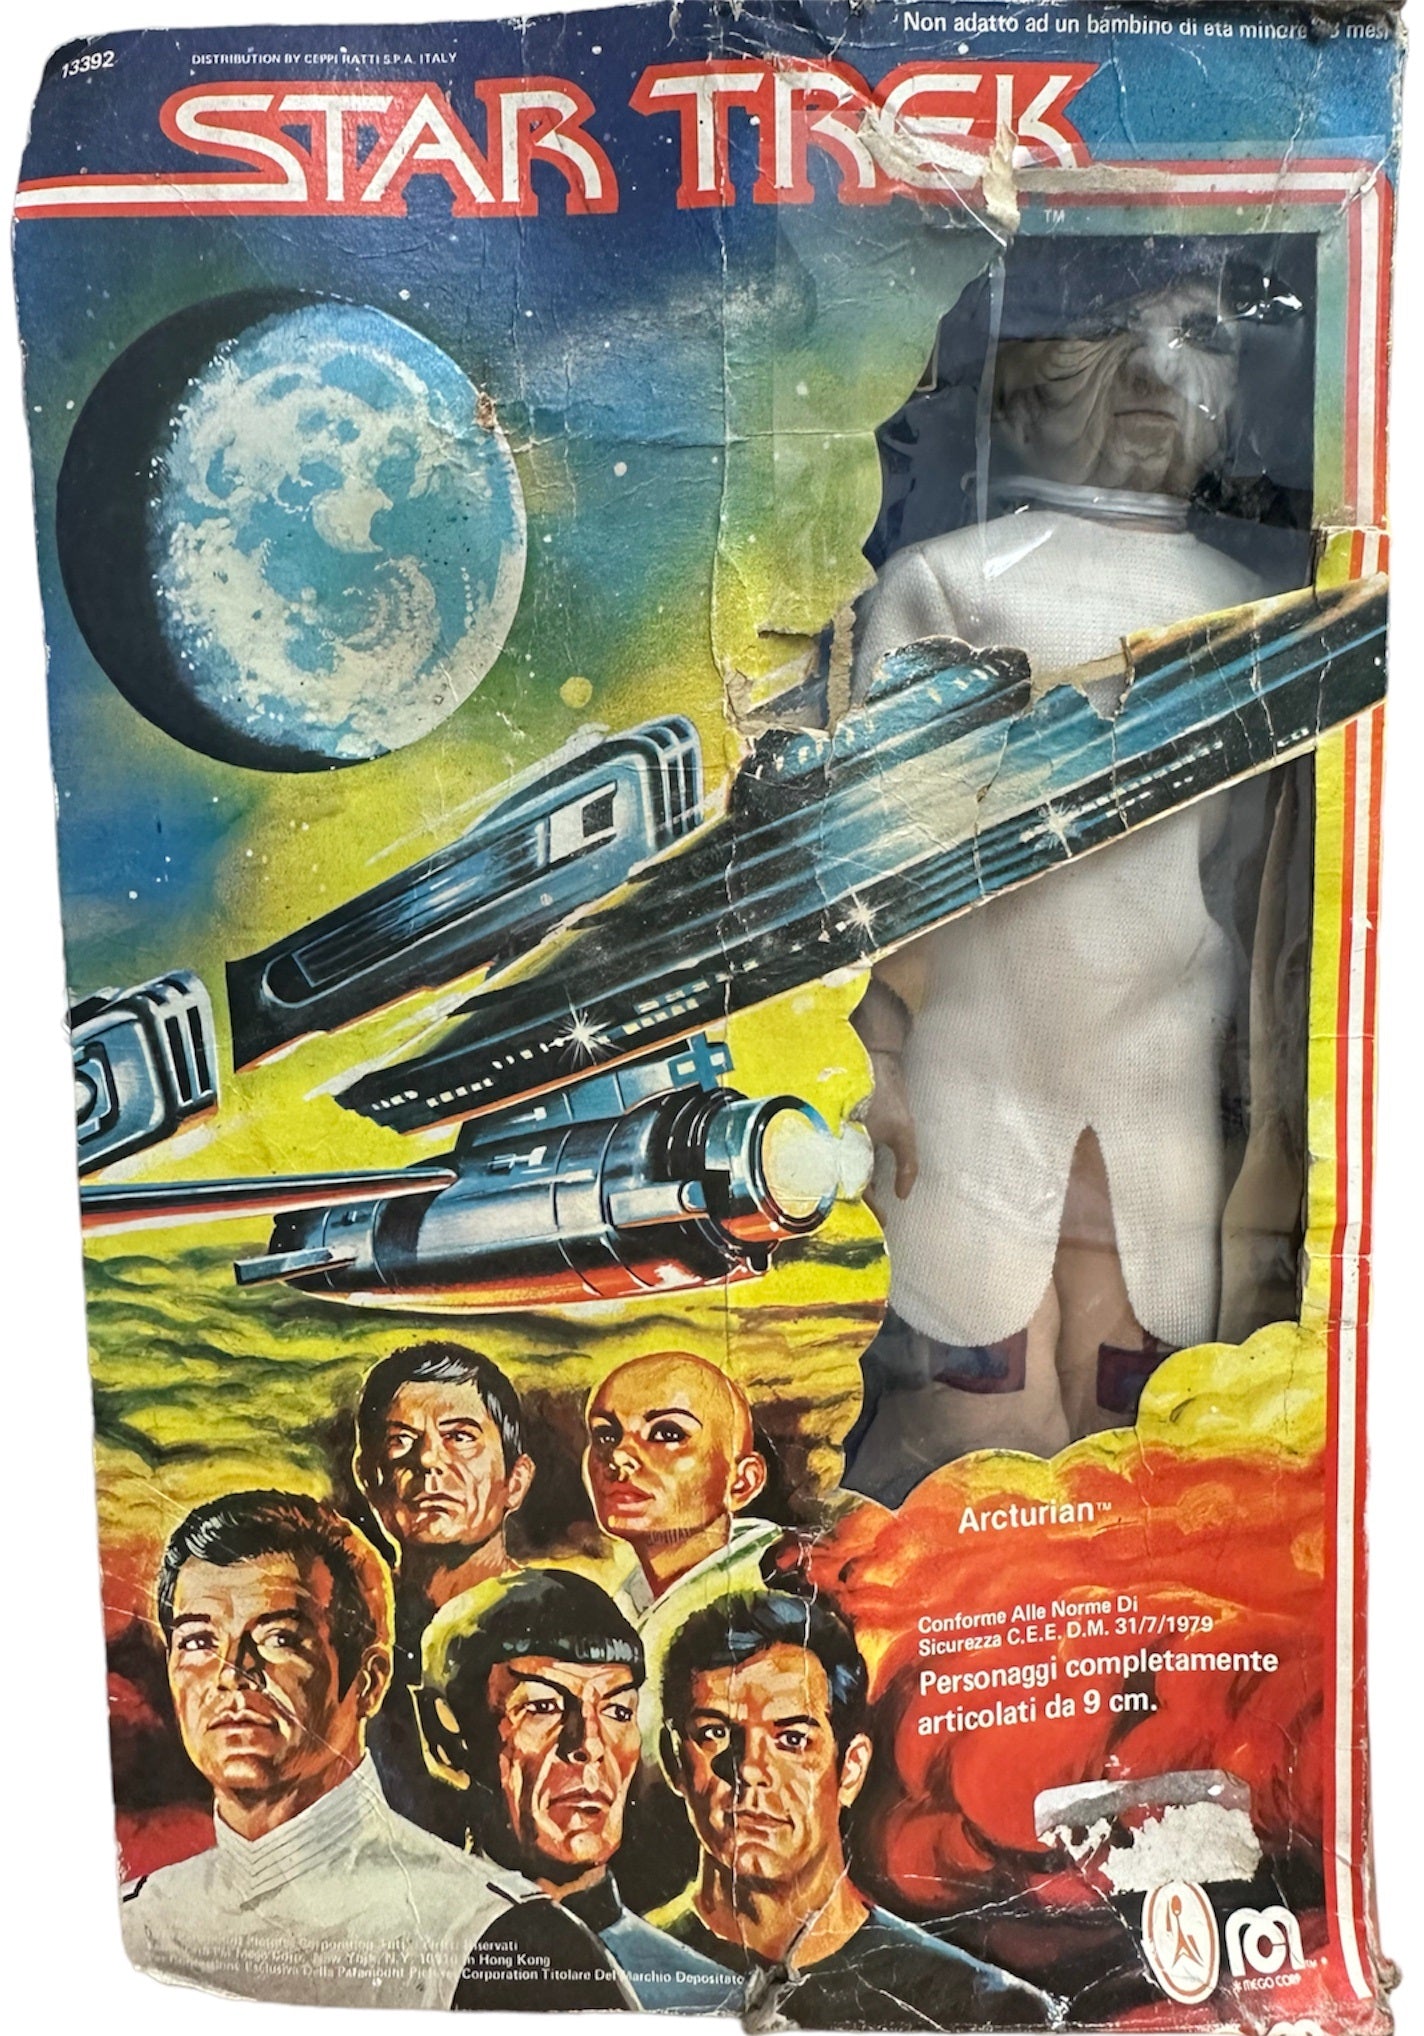 Vintage 1977 Star Trek The Motion Picture 12 inch Arcturian Action Figure - Fantastic Condition In The Original Box.